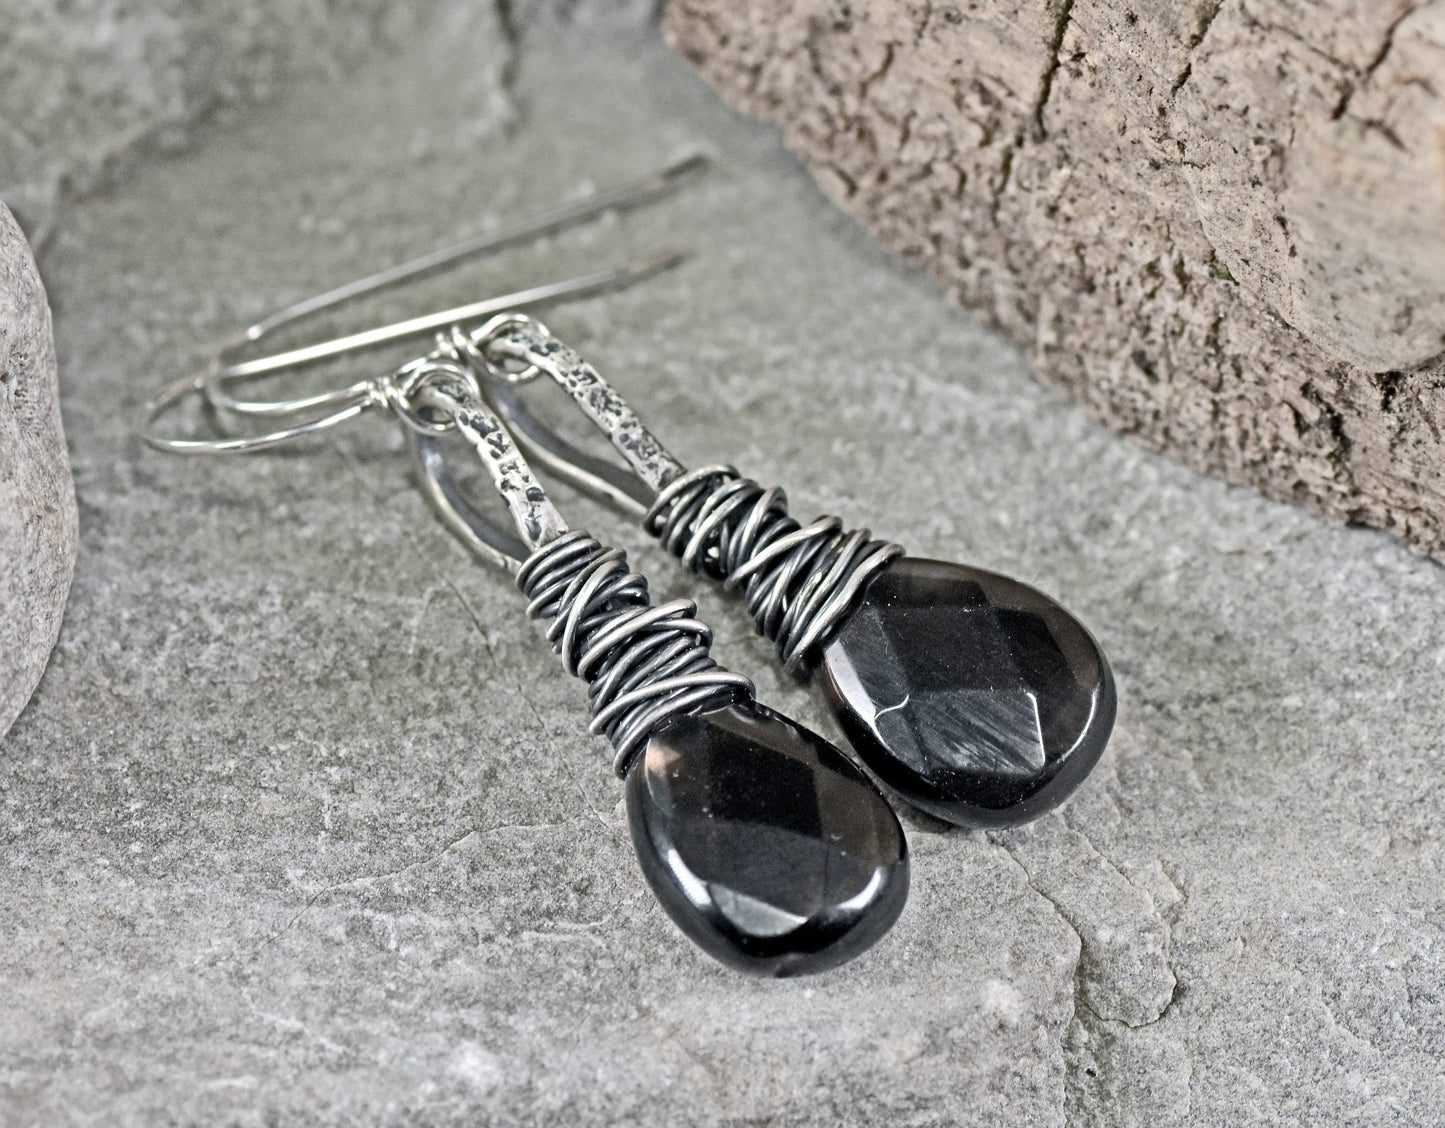 Smoky Quartz Teardrop Earrings Sterling Silver, Large Grey Faceted Gemstone Dangles, Messy Wire Wrap Natural Stone Jewelry Handmade